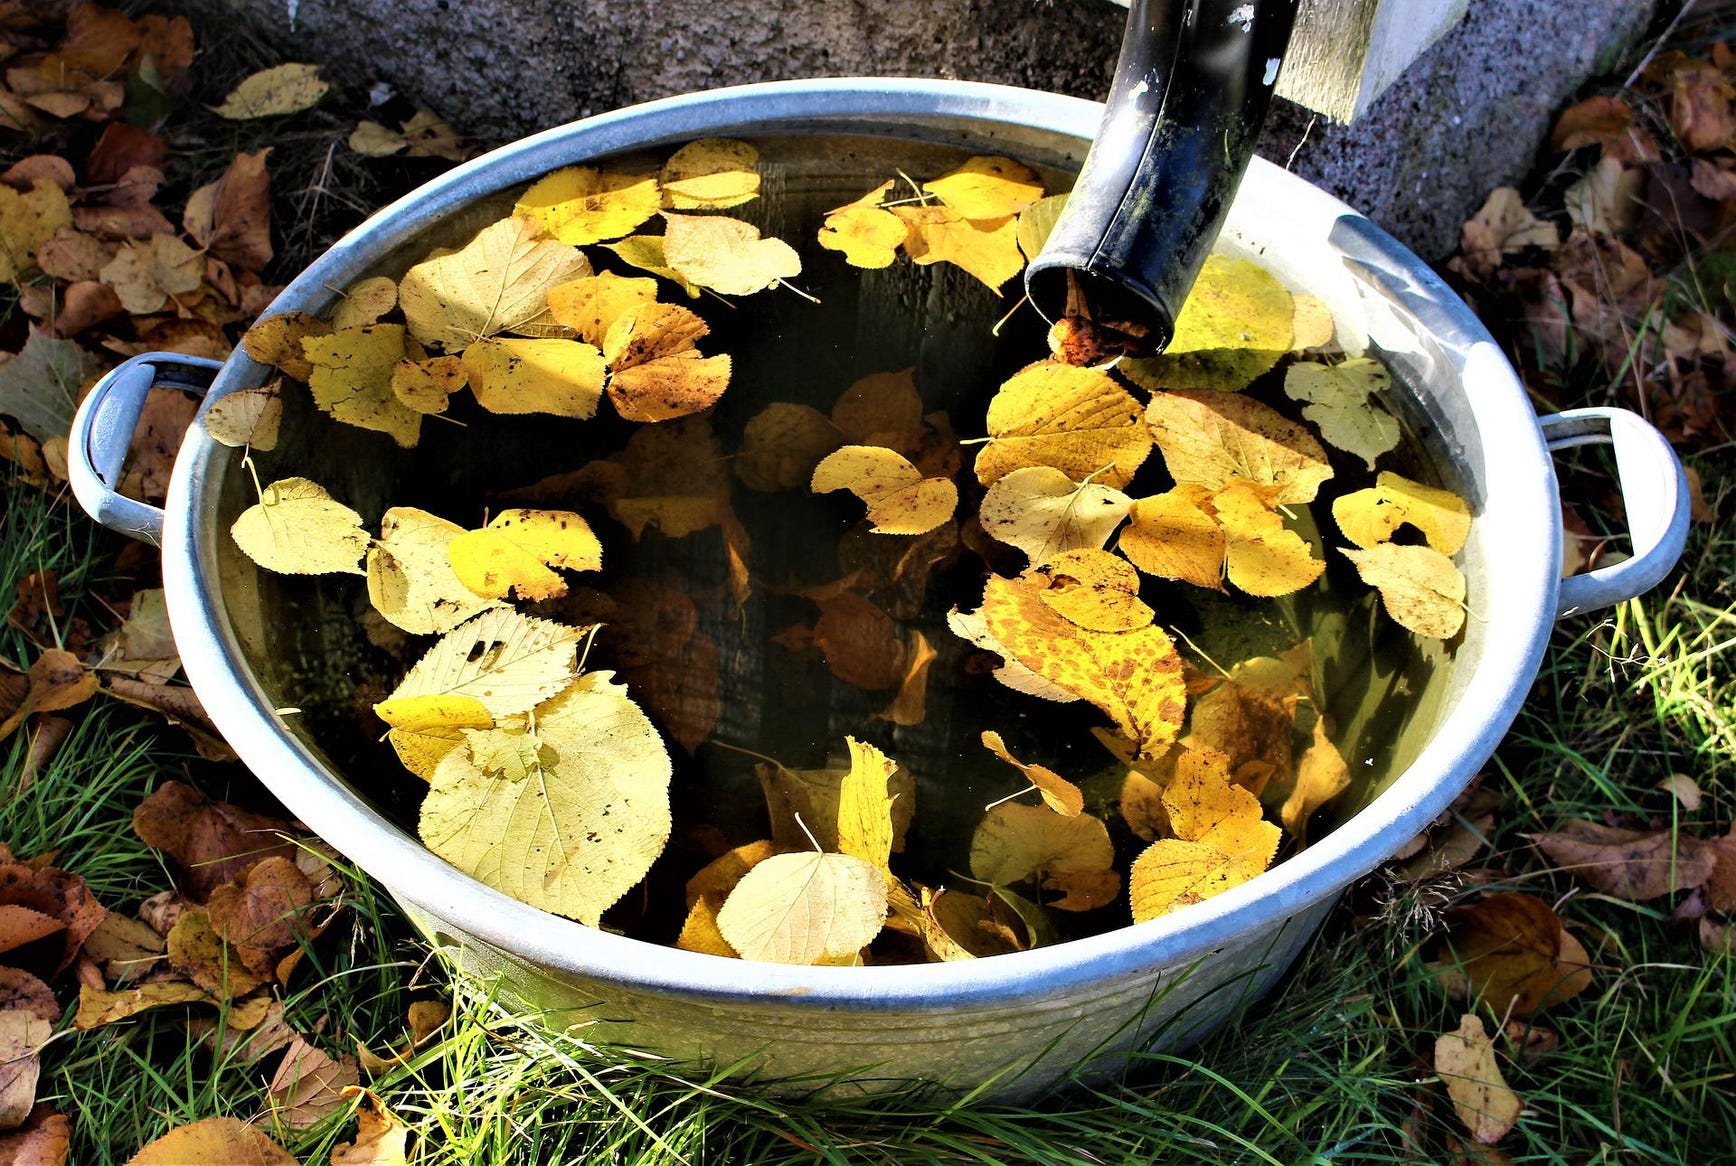 autumn leaves collect in a rain barrel